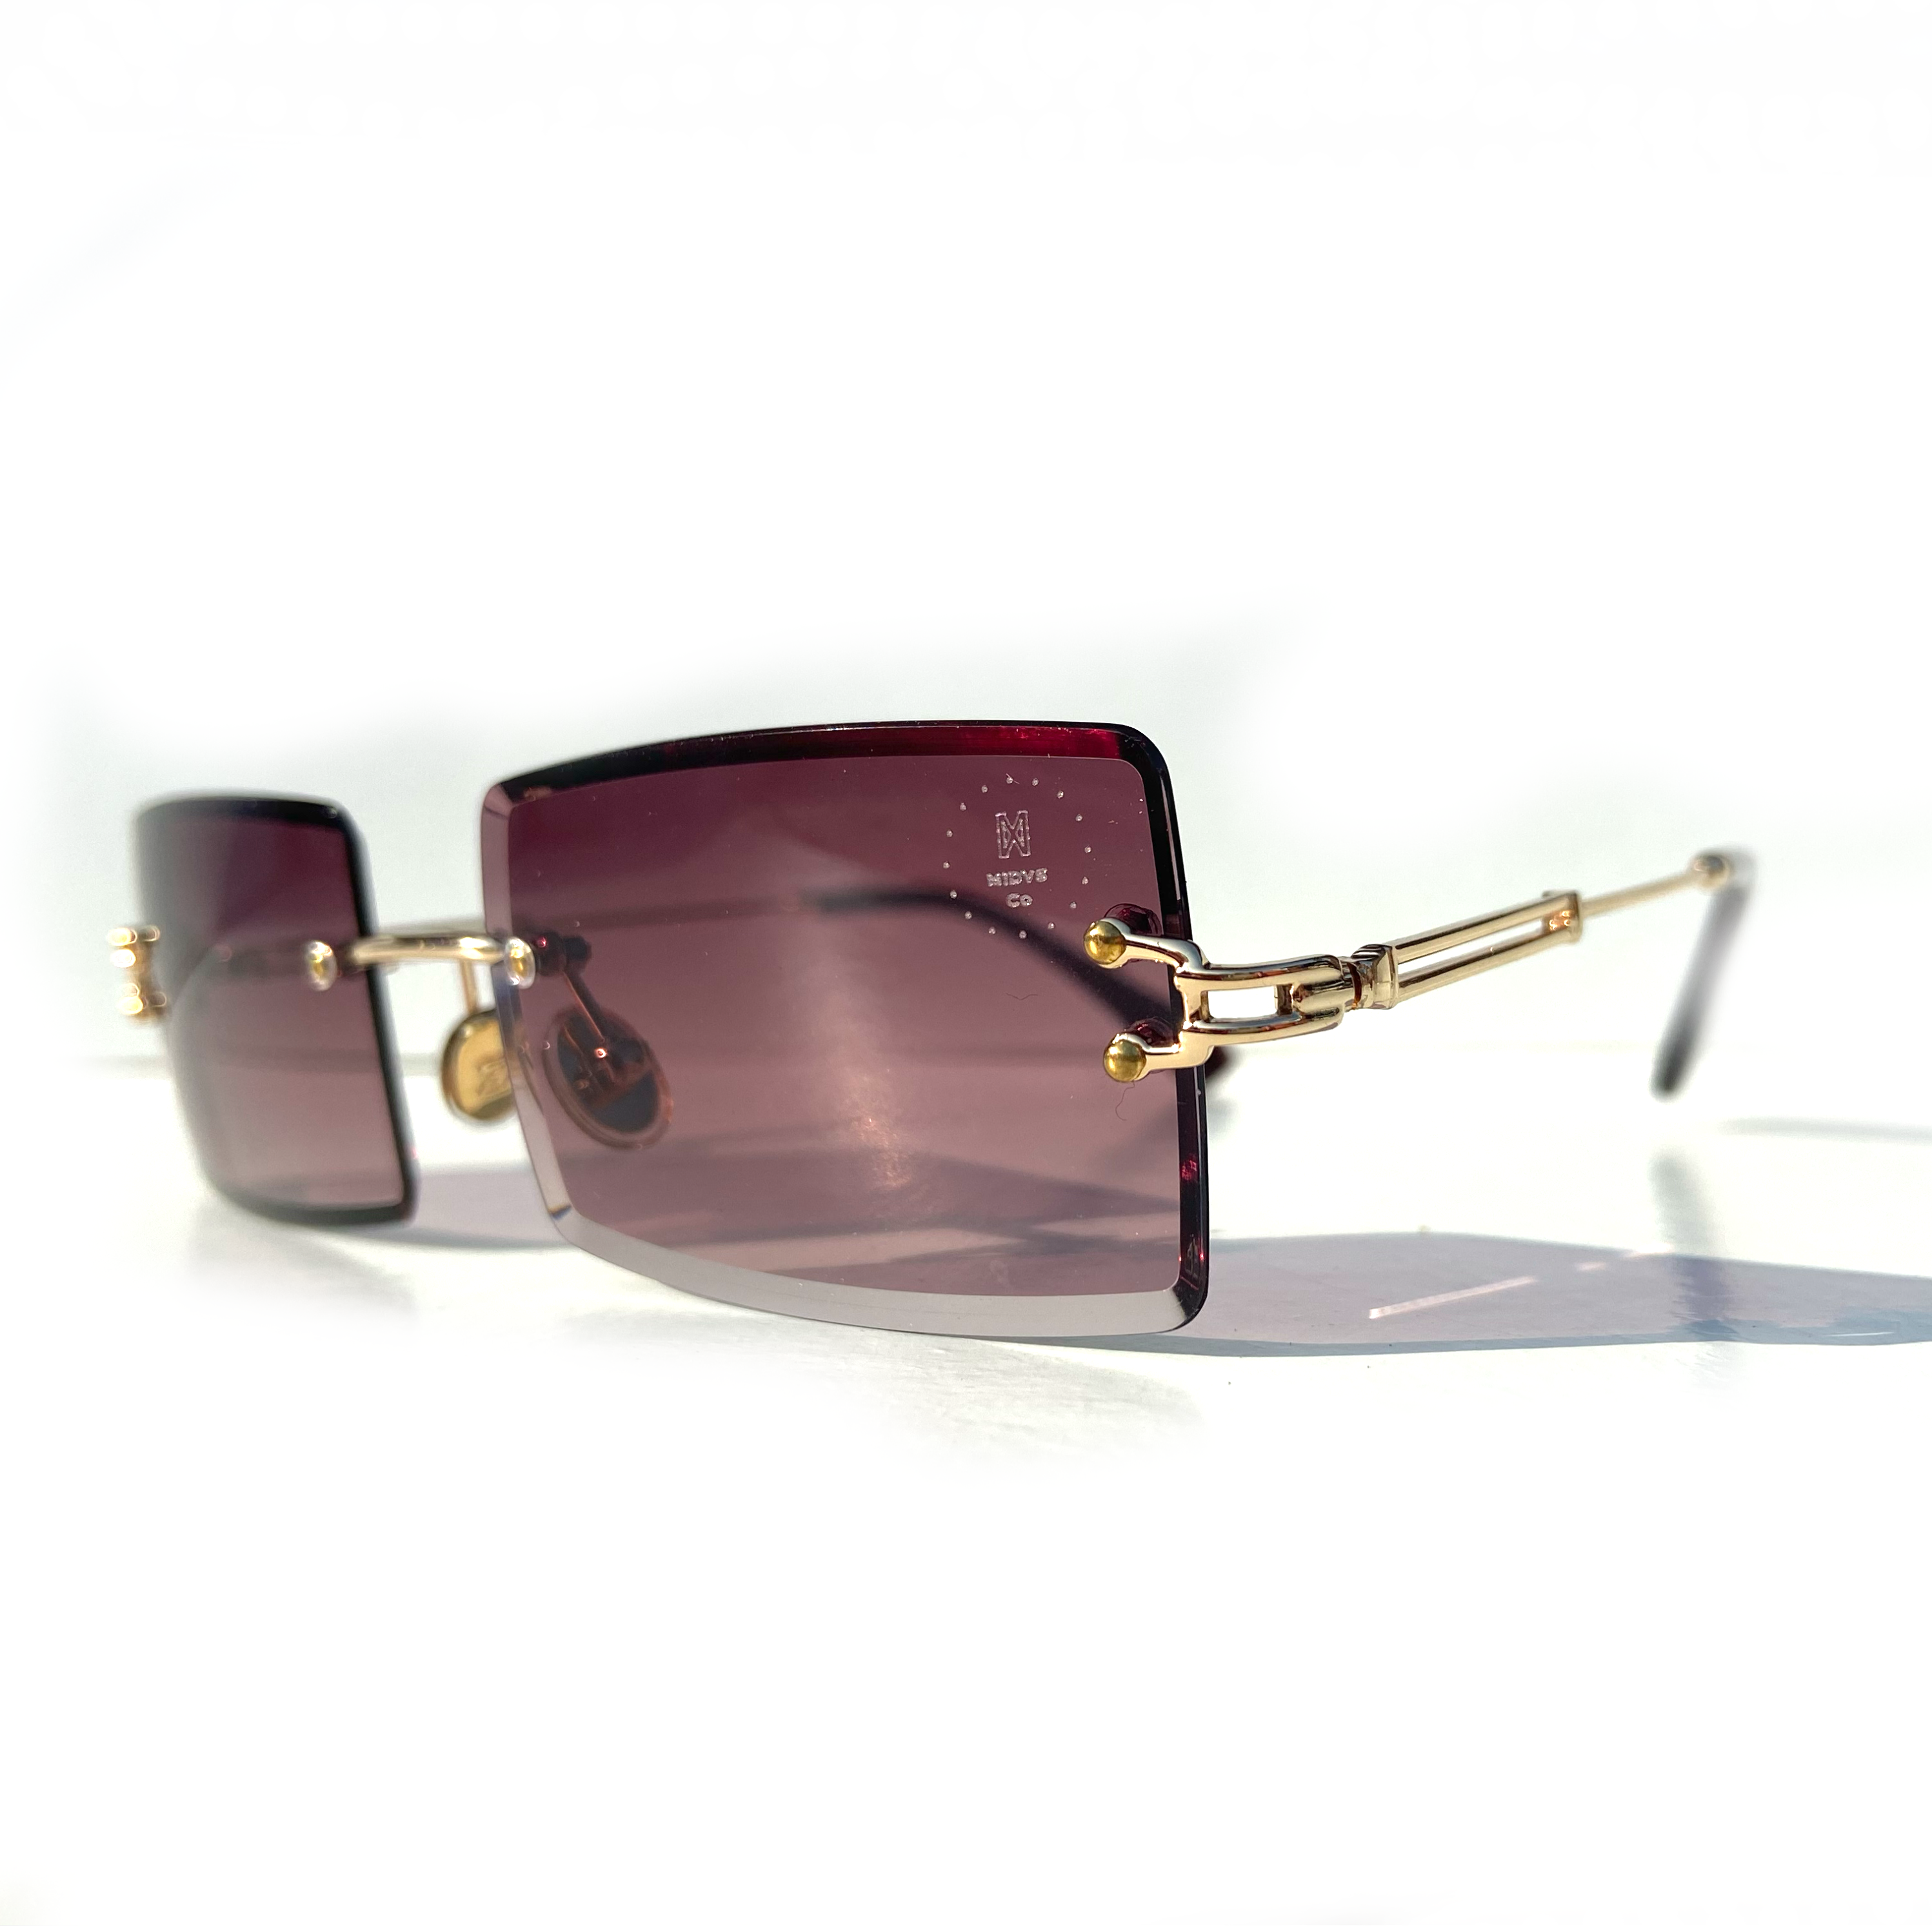 The Capone Shades Brown Smoke / Gold